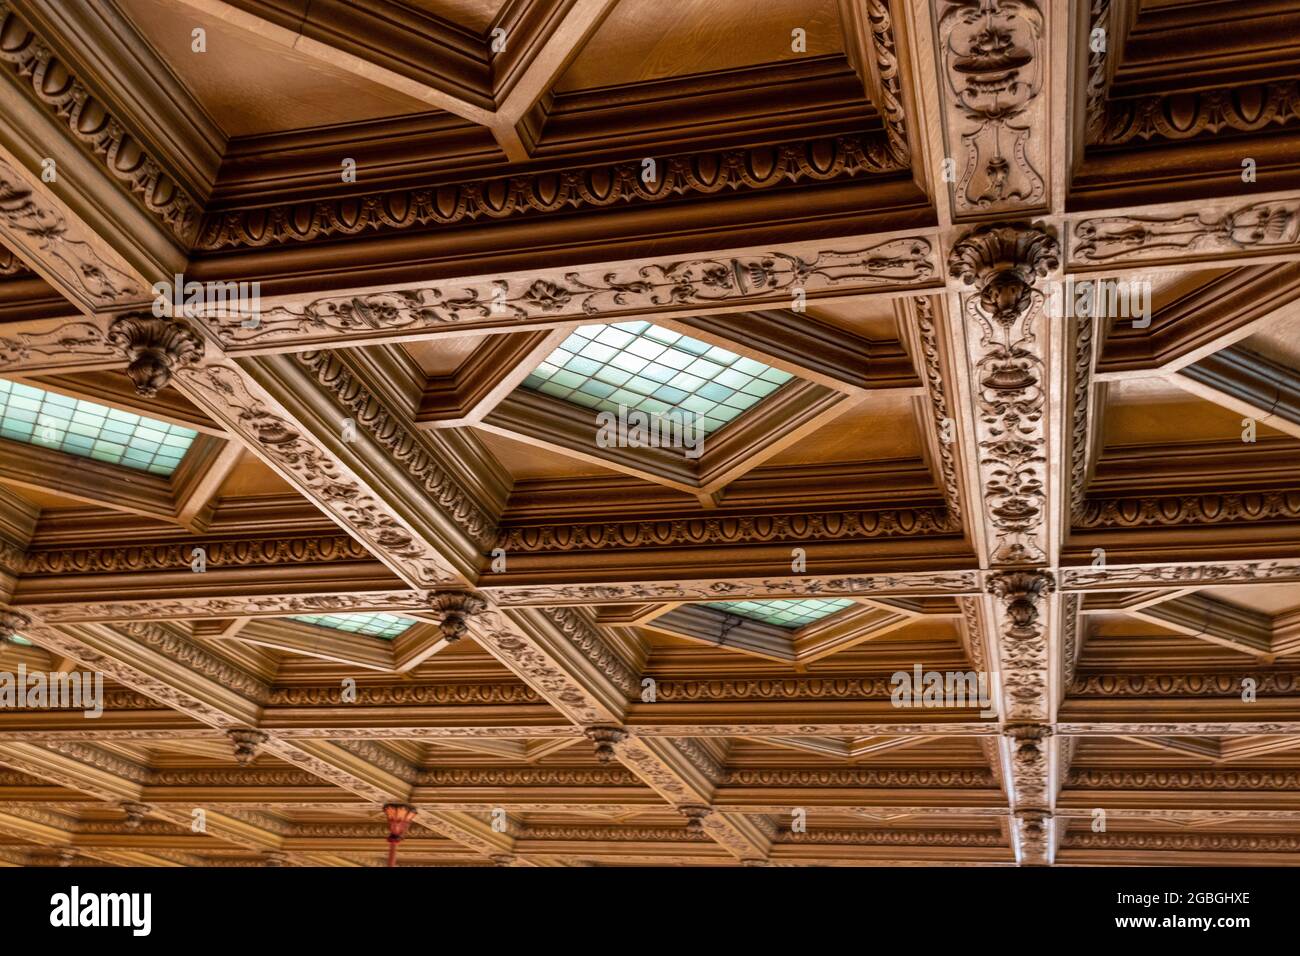 Low angle view of an ornate ceiling at the Museum of Decorative Arts in Buenos Aires, Argentina Stock Photo